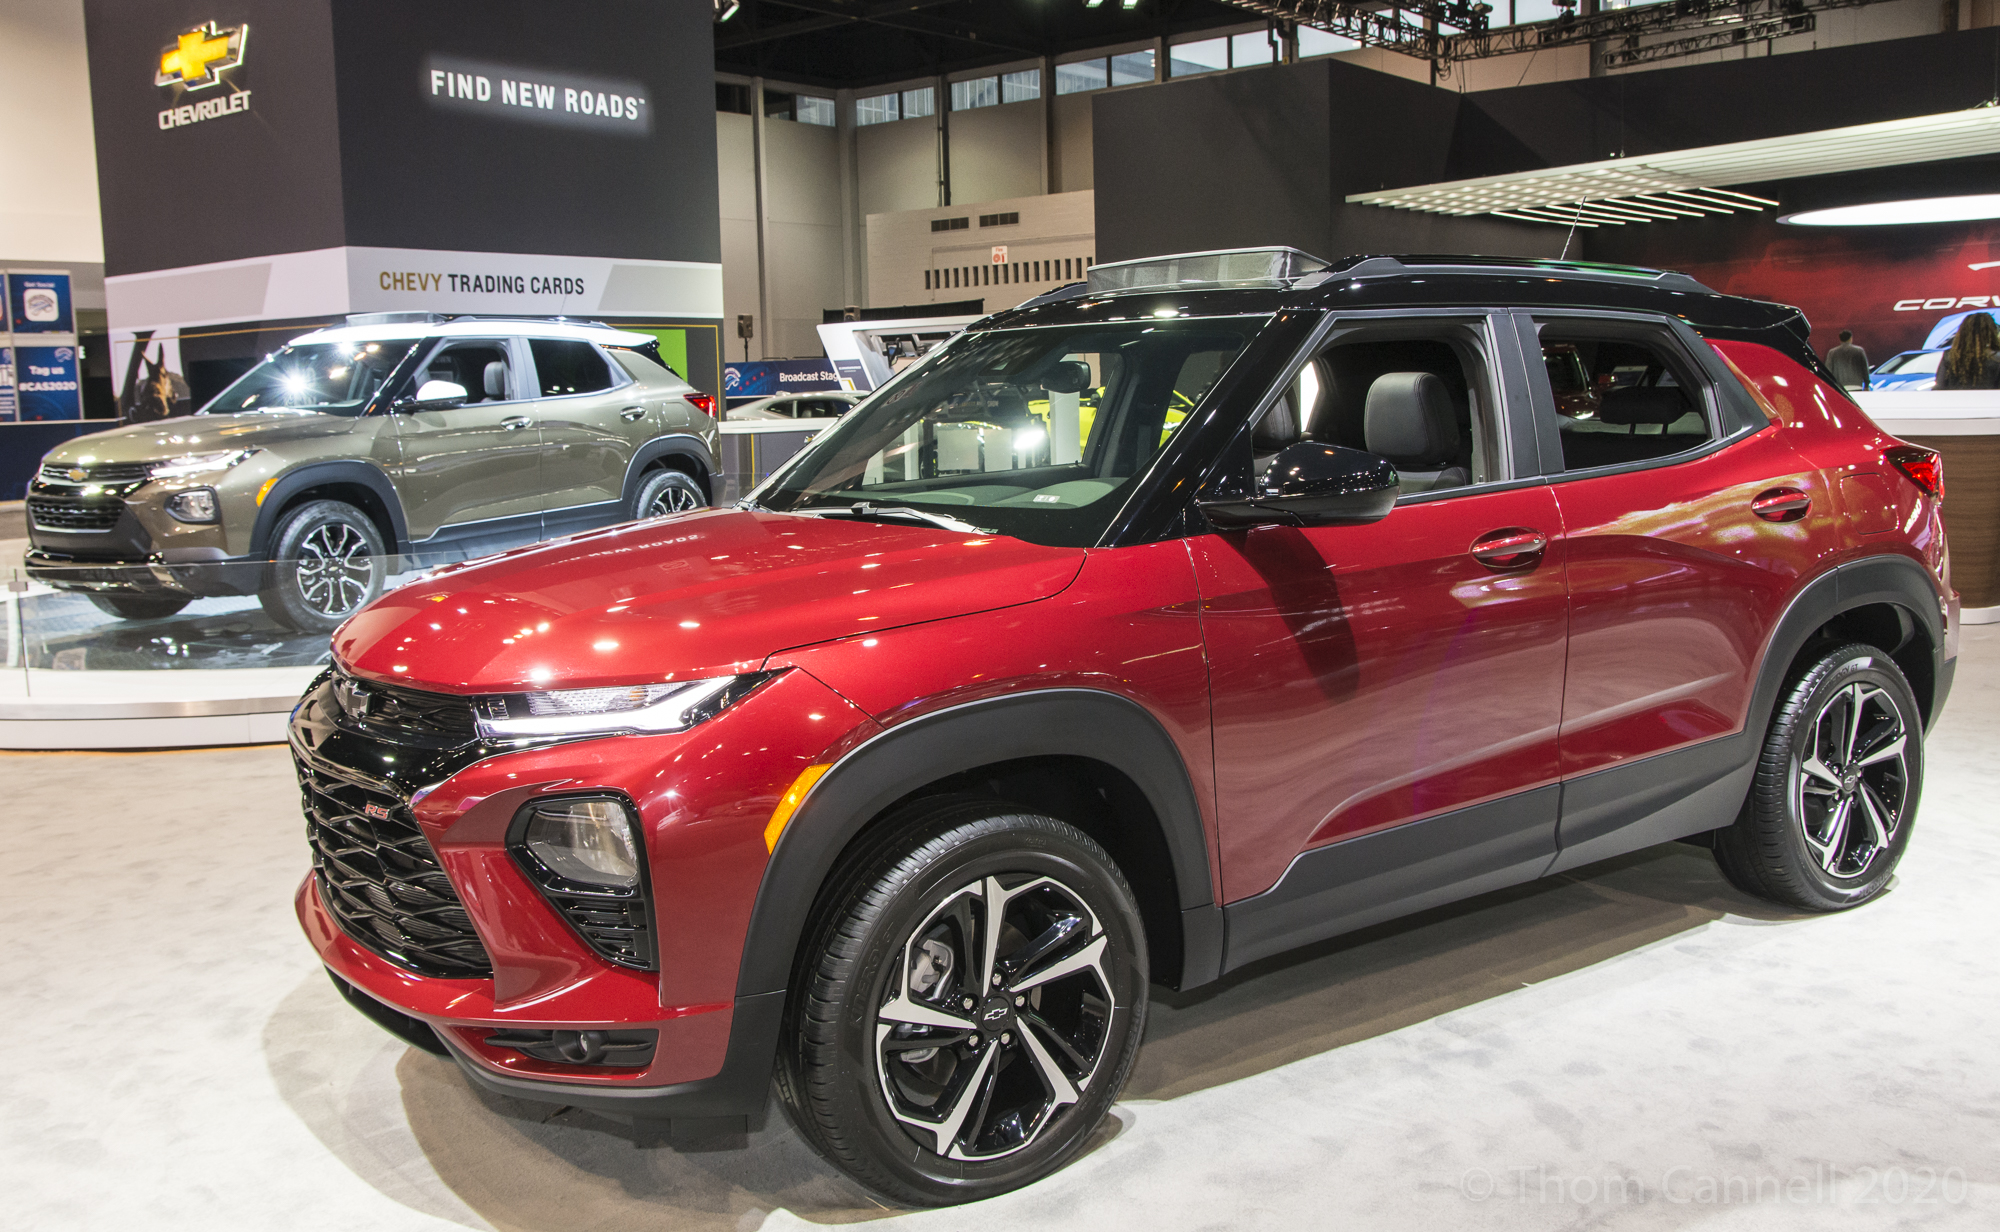 General Motors Shows Off New Product At The 2020 Chicago Auto Show | GM ...